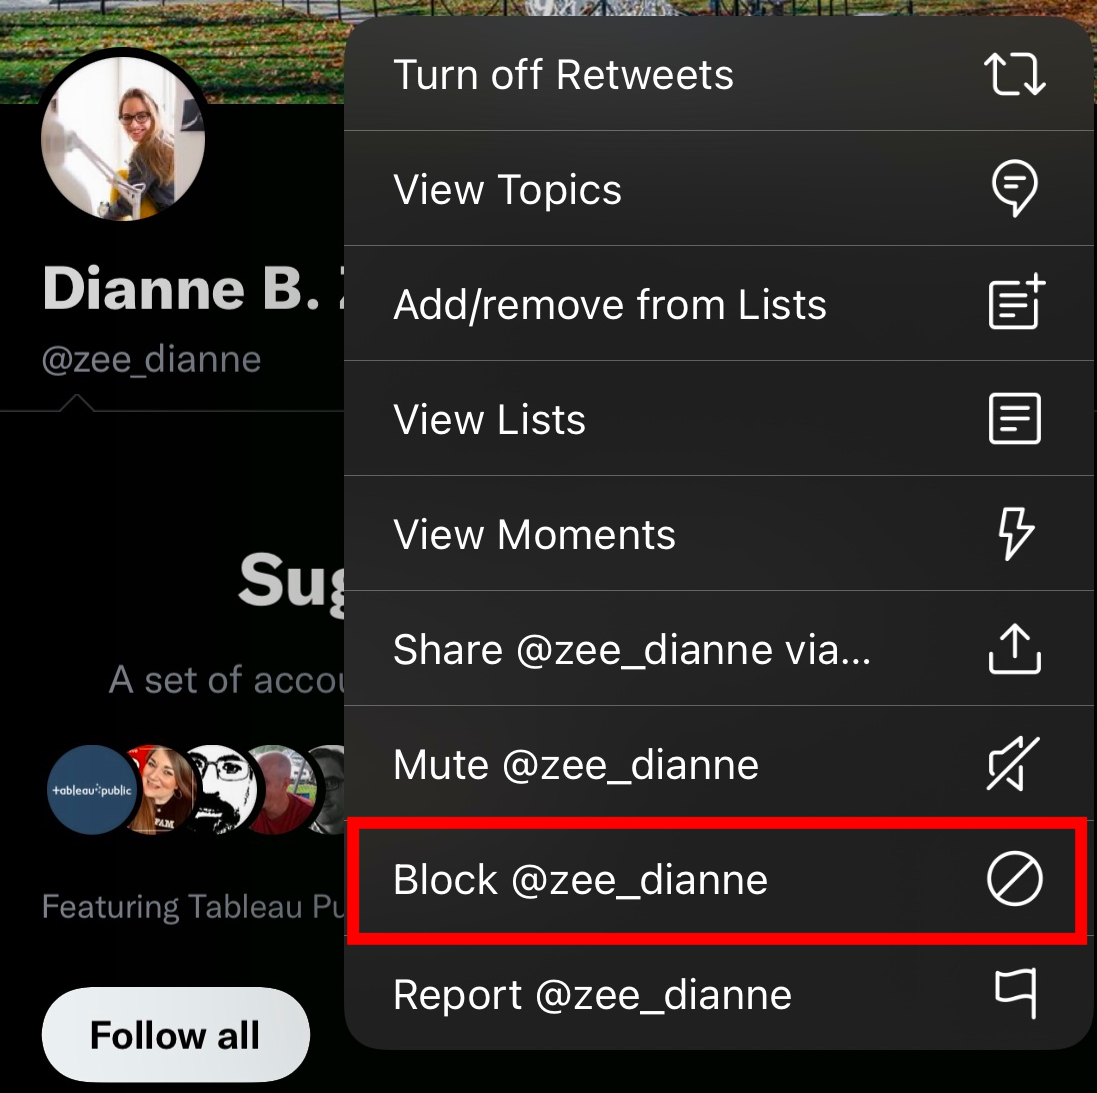 Soft block on Twitter is basically blocking and unblocking a Twitter user consecutively to remove the user from your follower list without their knowledge.